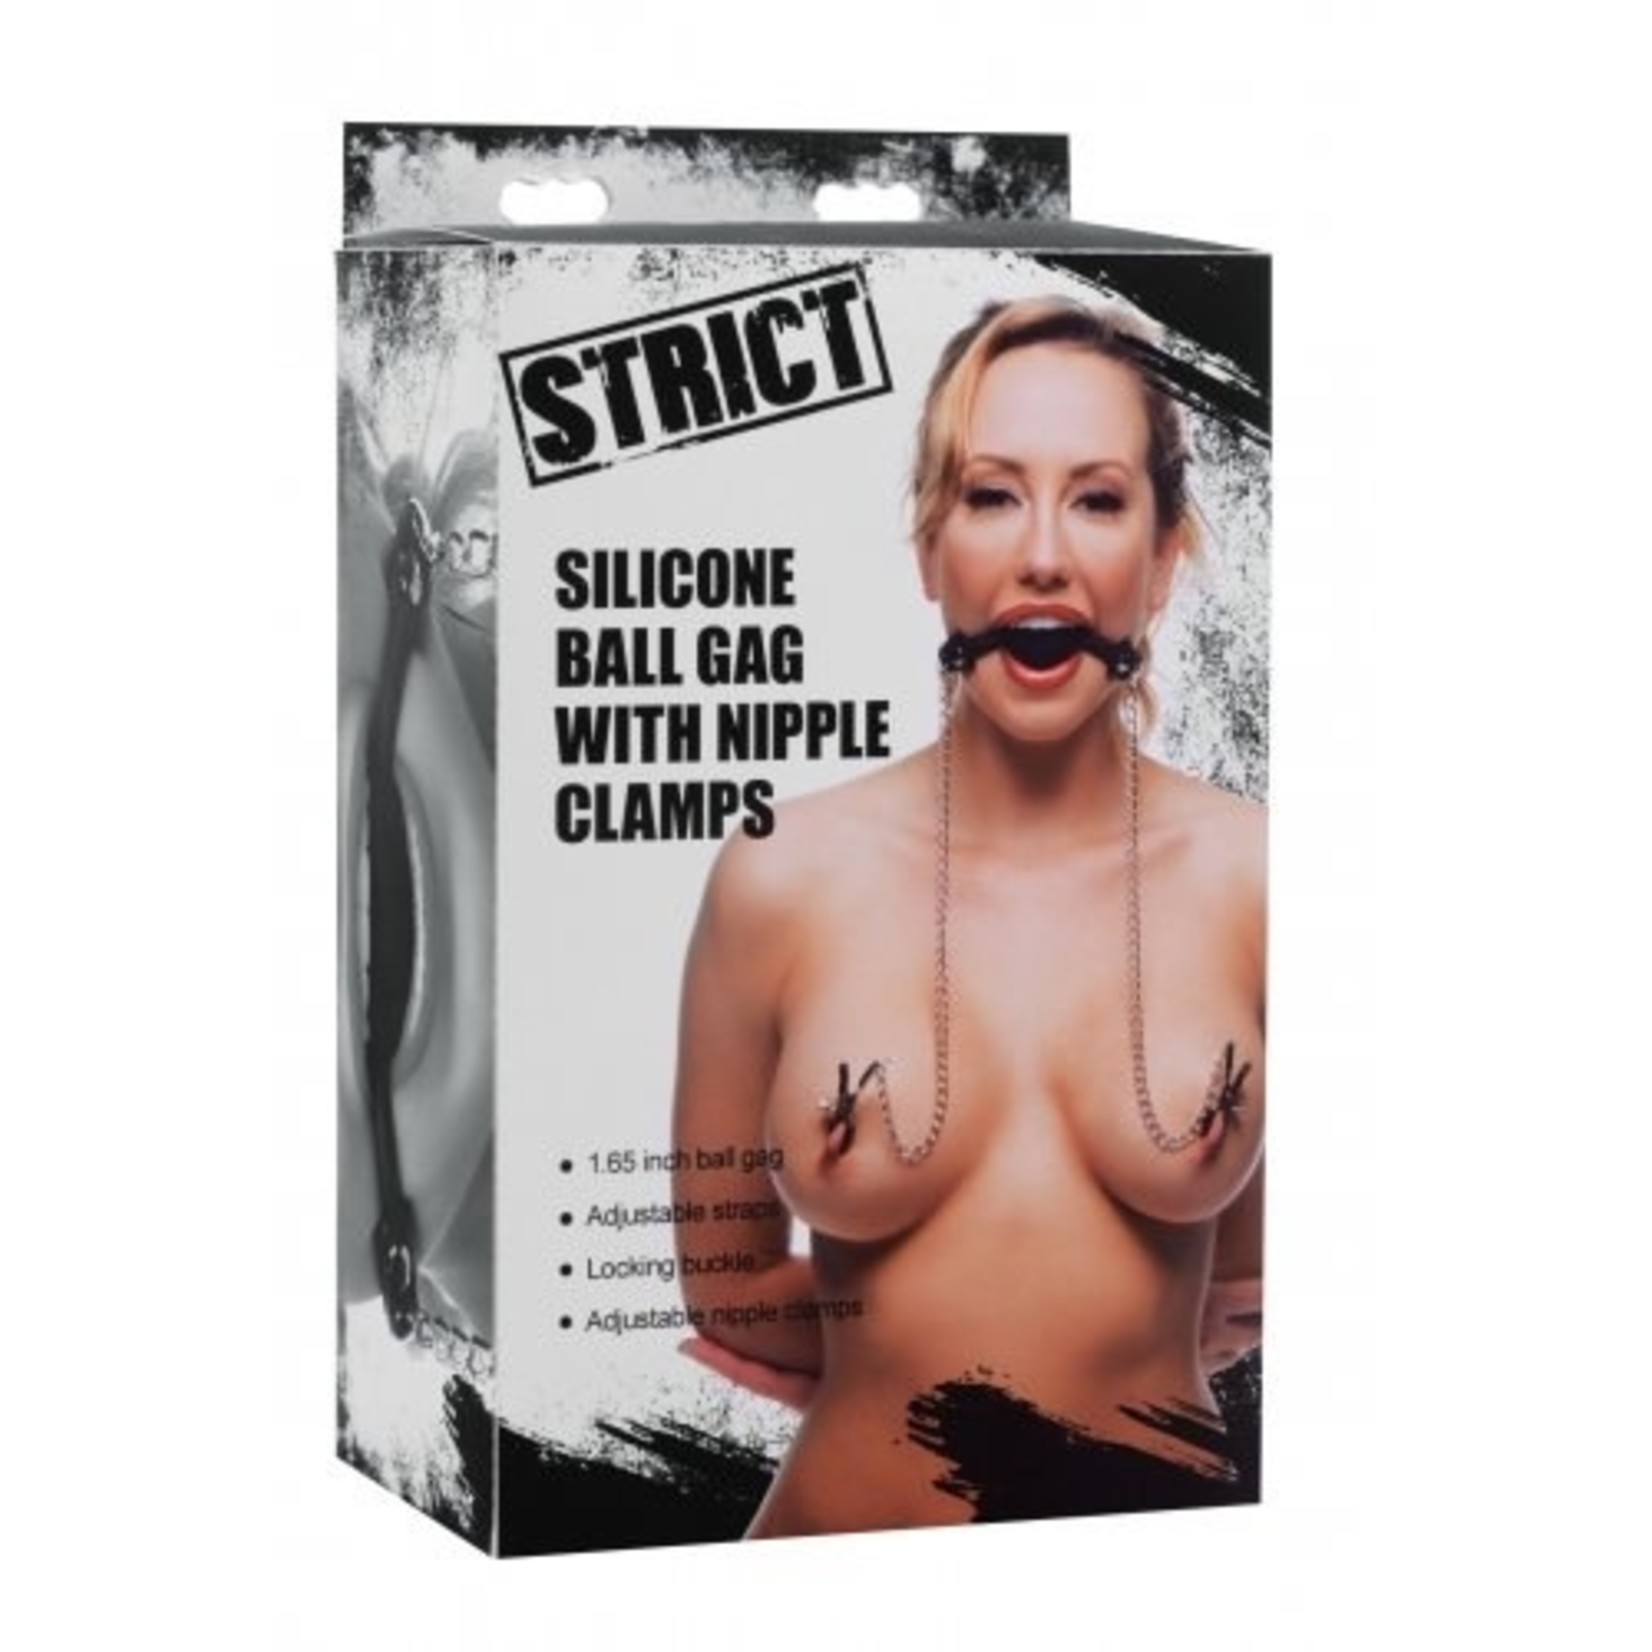 STRICT STRICT - SILICONE BALL GAG WITH NIPPLE CLAMPS